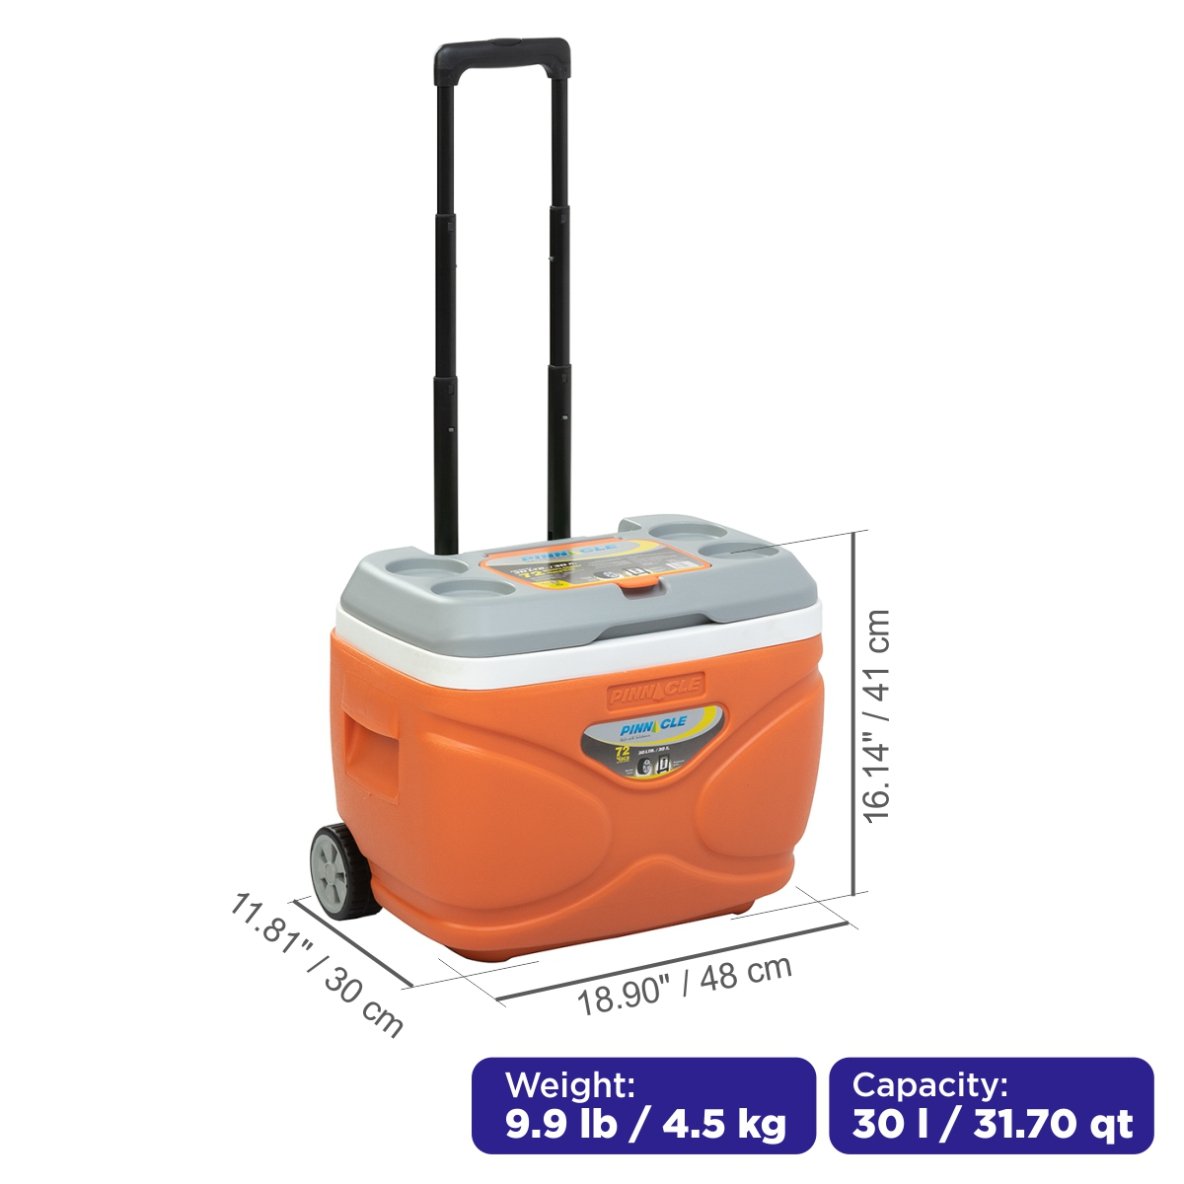 Prudence Wheeling Ice Chest with Retractable Handle, 31 qt, Orange weighs 10 lbs, 19 inches long, 16 inches high and 12 inches wide